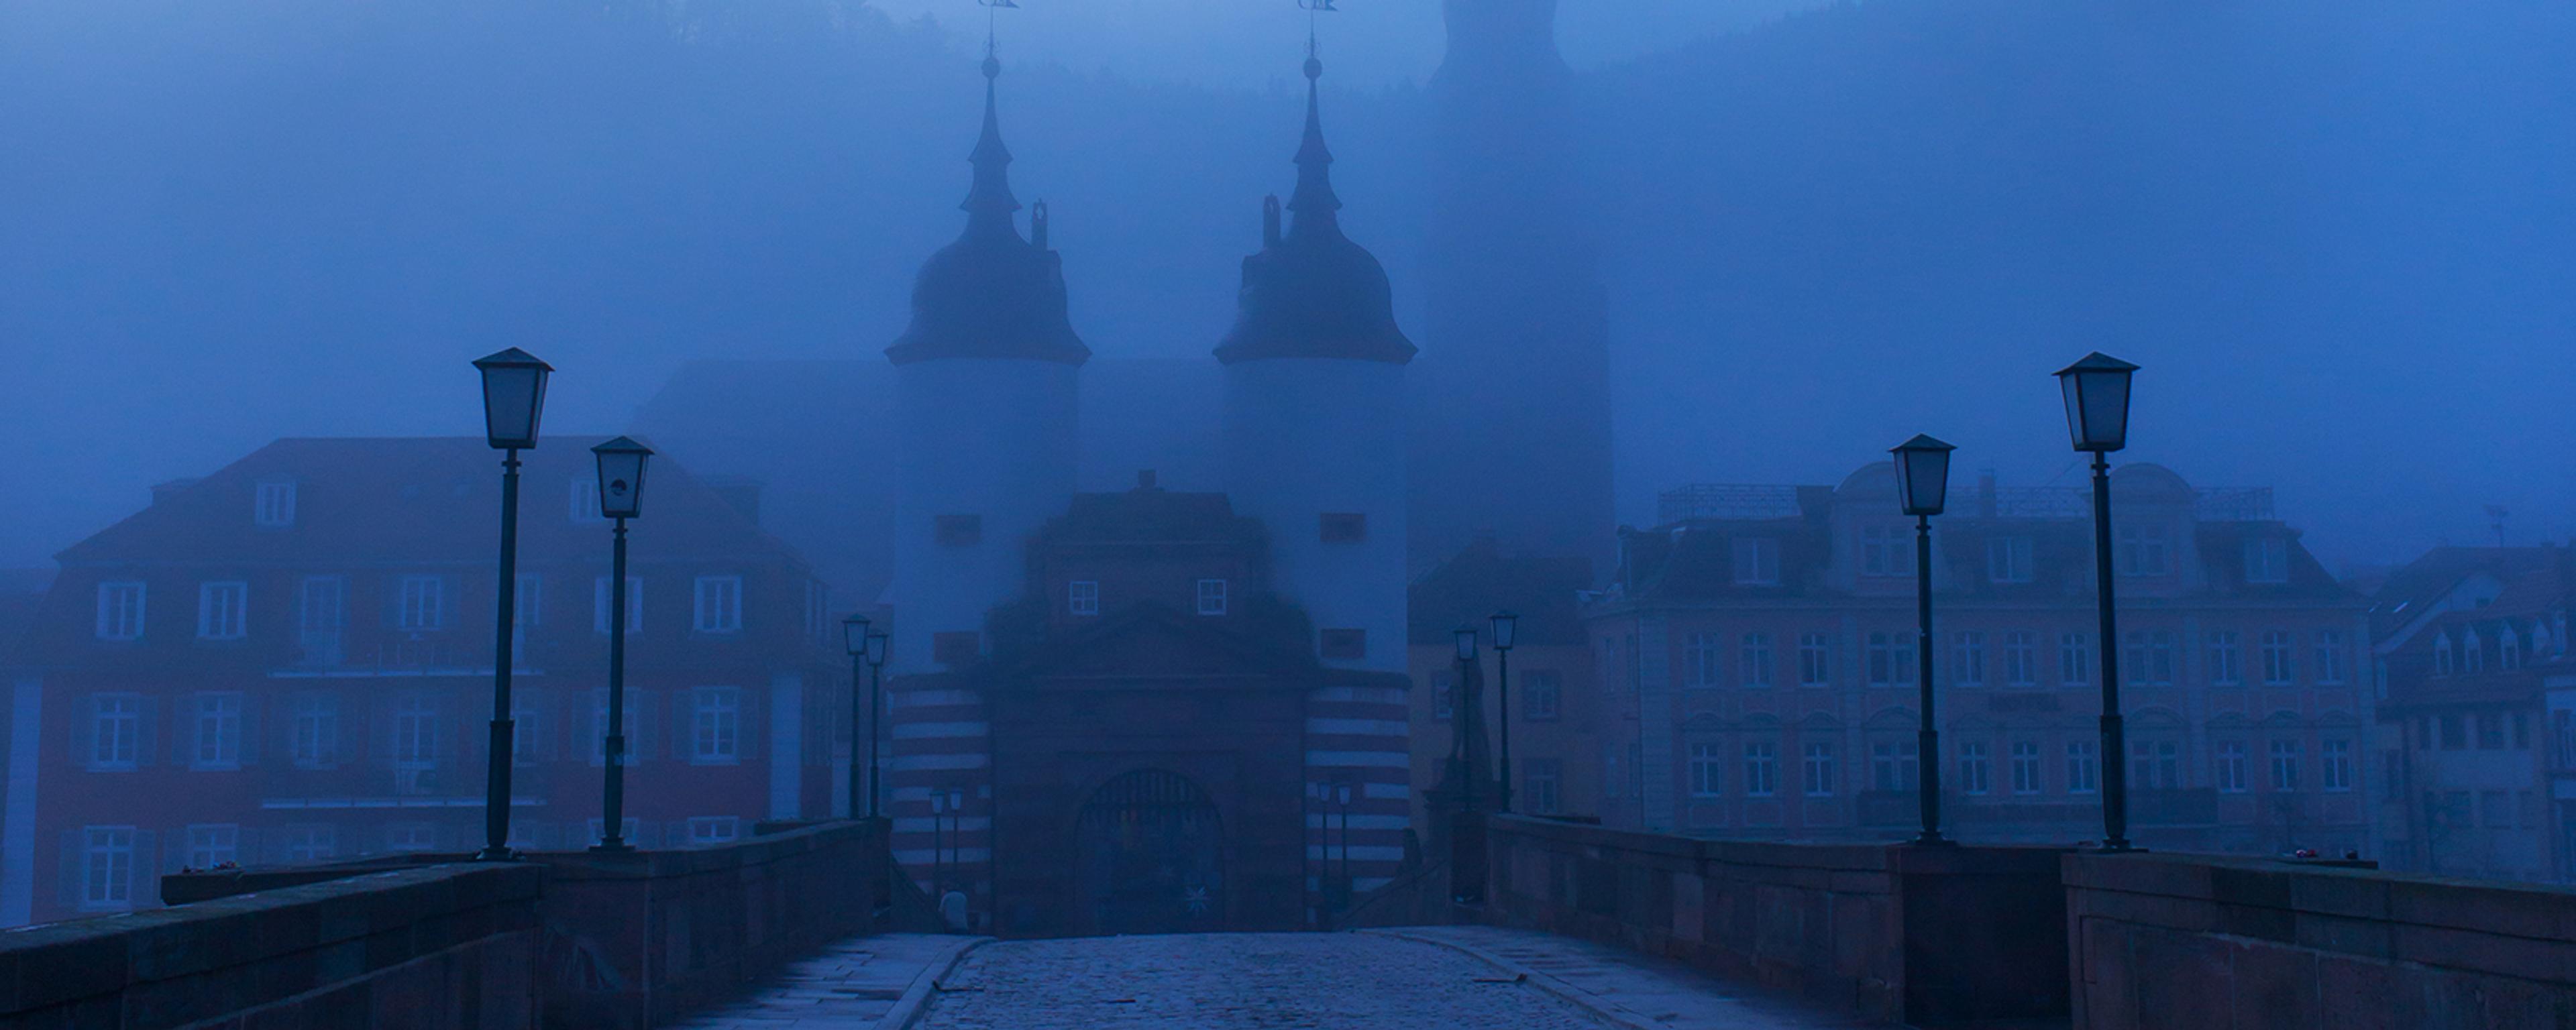 An early morning view across an old bridge towards the spires of a historic medieval city partially obscured by fog